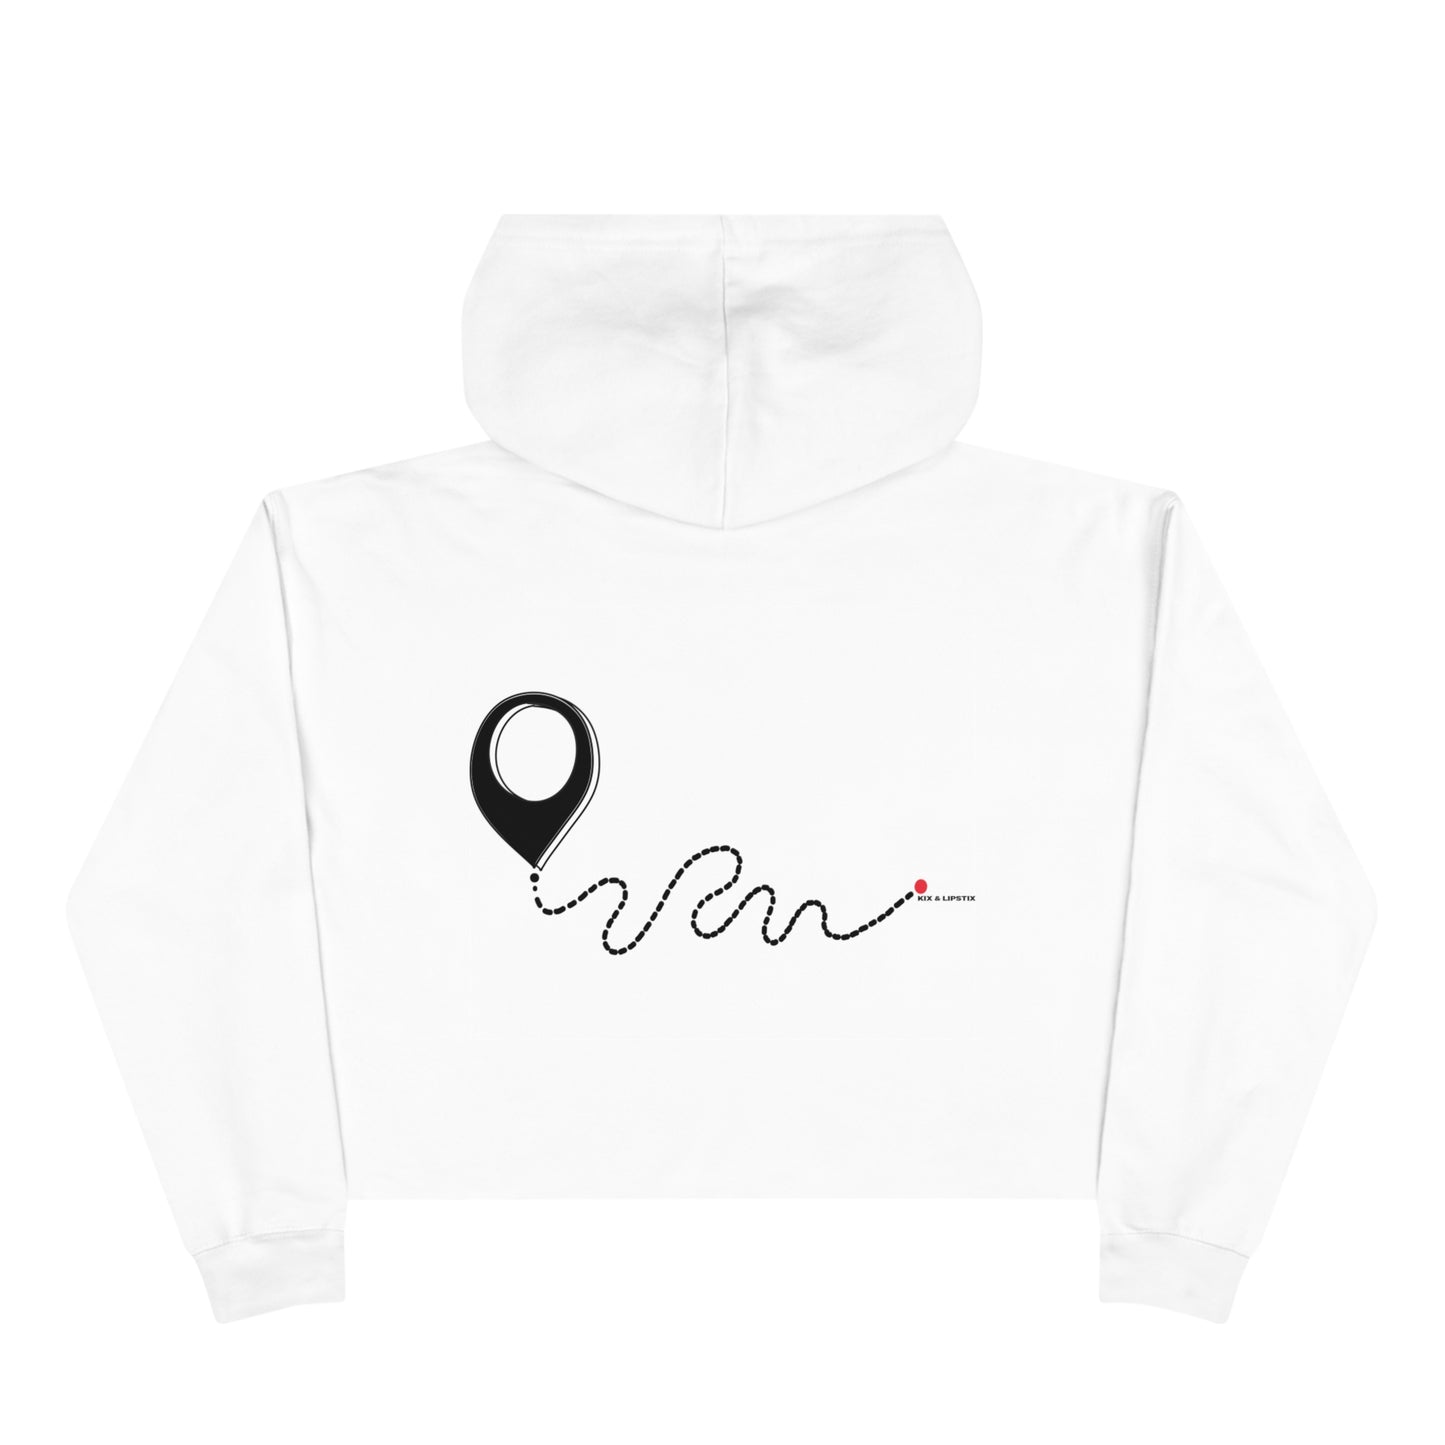 "Great Sneakers Take You Great Places" Crop Hoodie